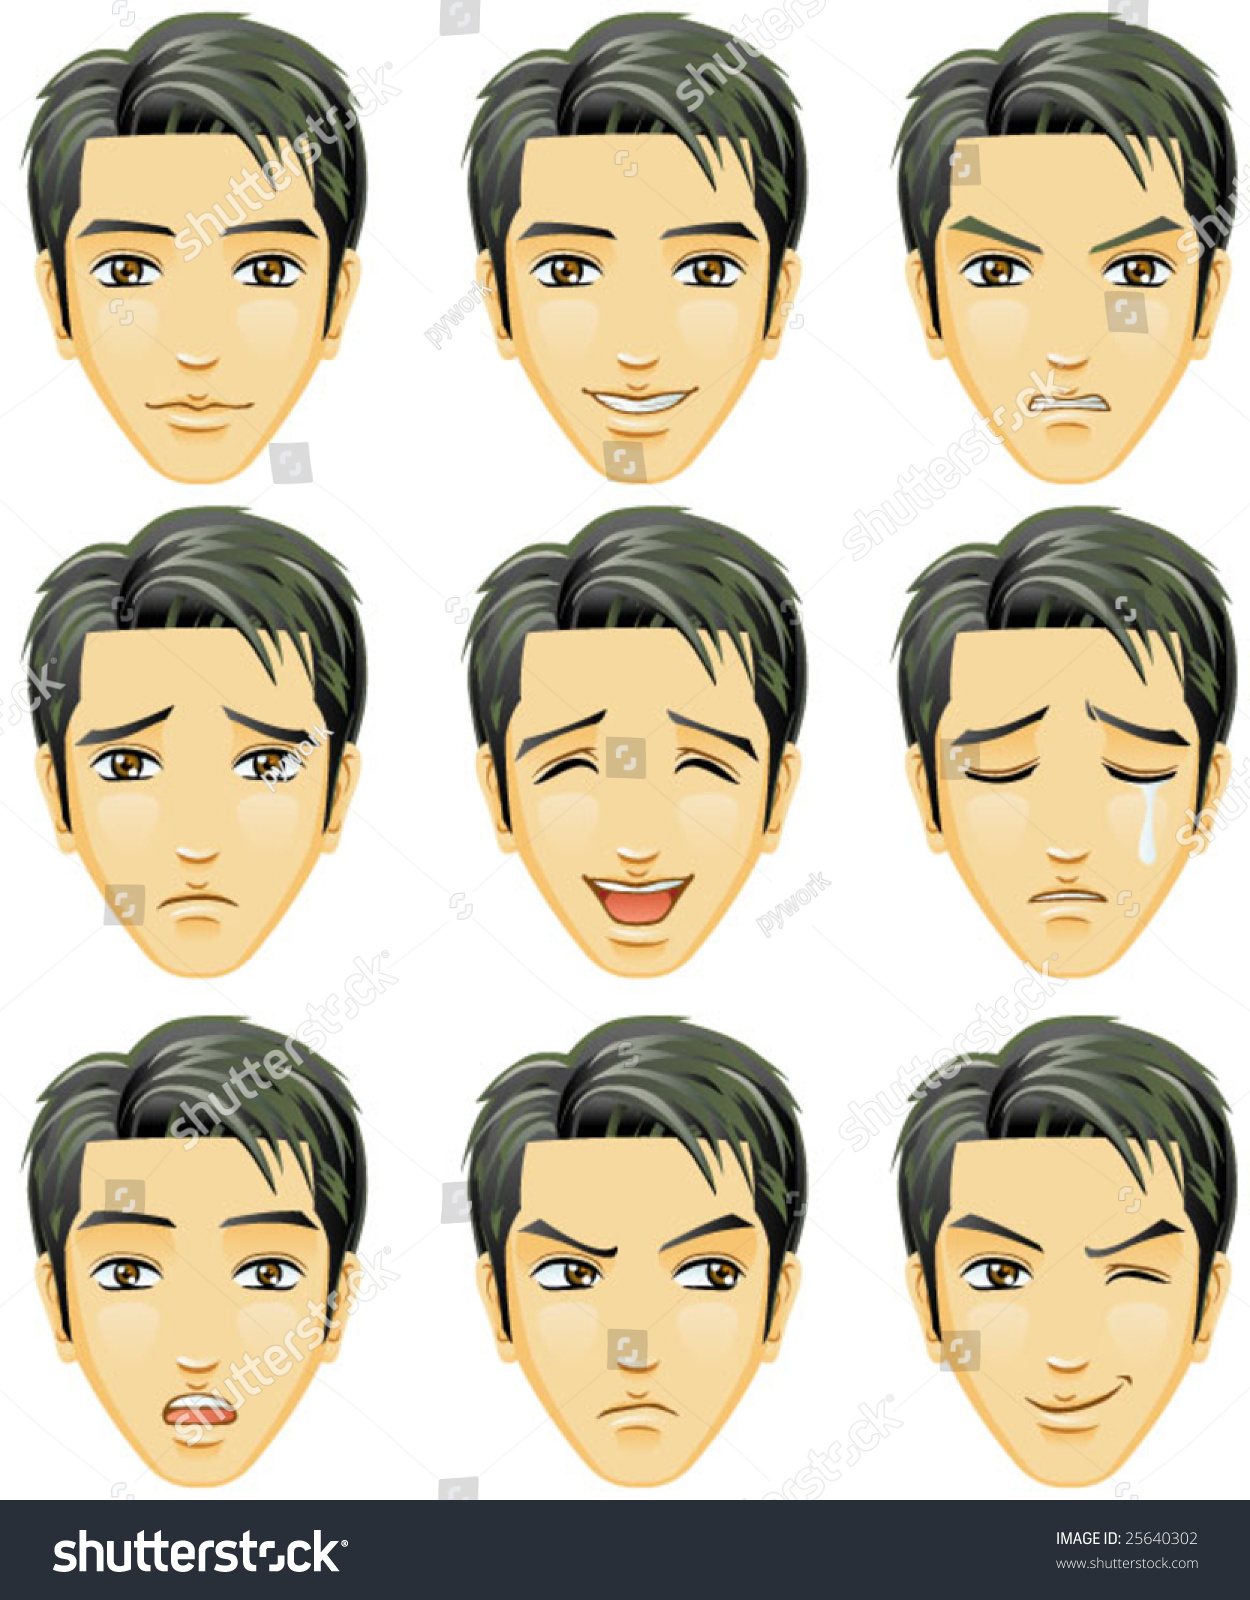 clip art facial expressions pictures - photo #39